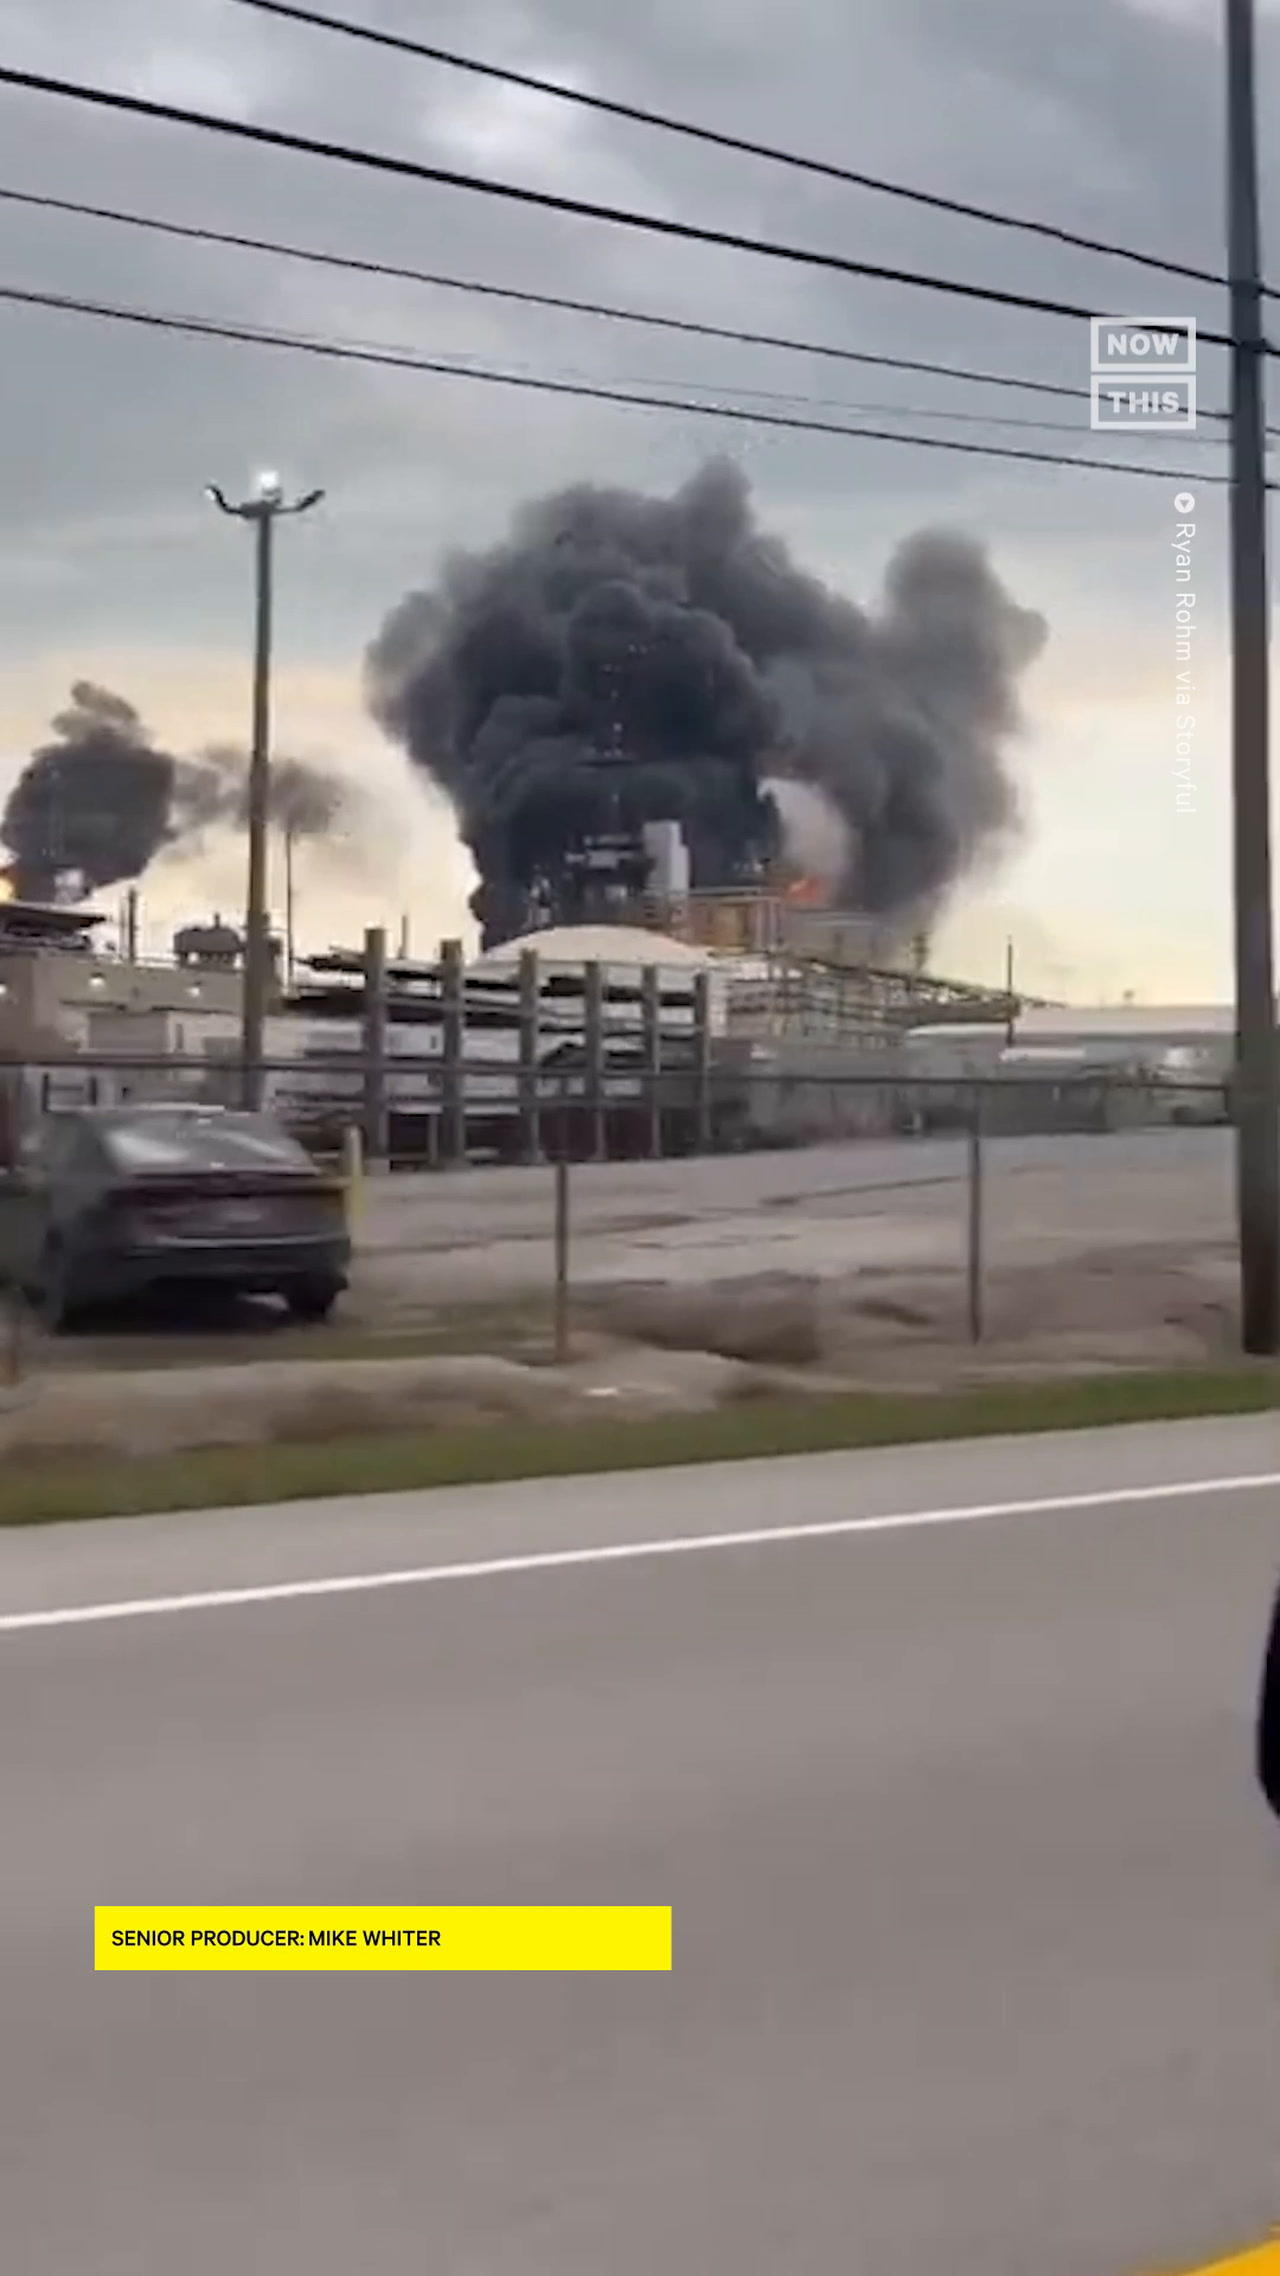 Ohio BP Refinery Non-Operational After Explosion